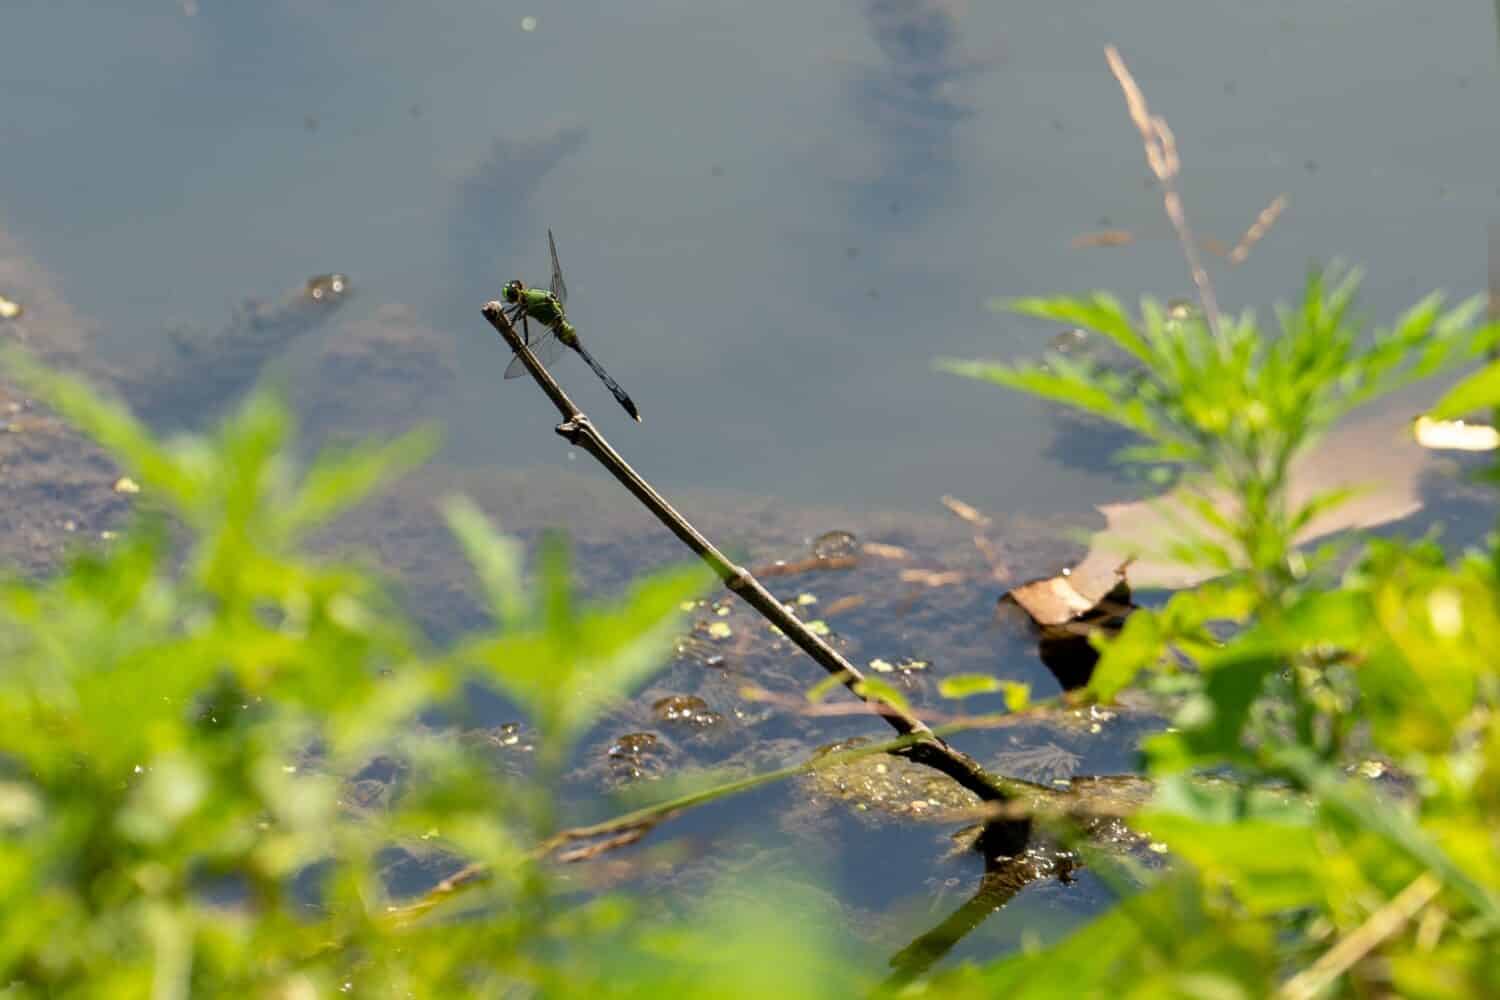 Common Green Darner dragonfly perched on branch over pond